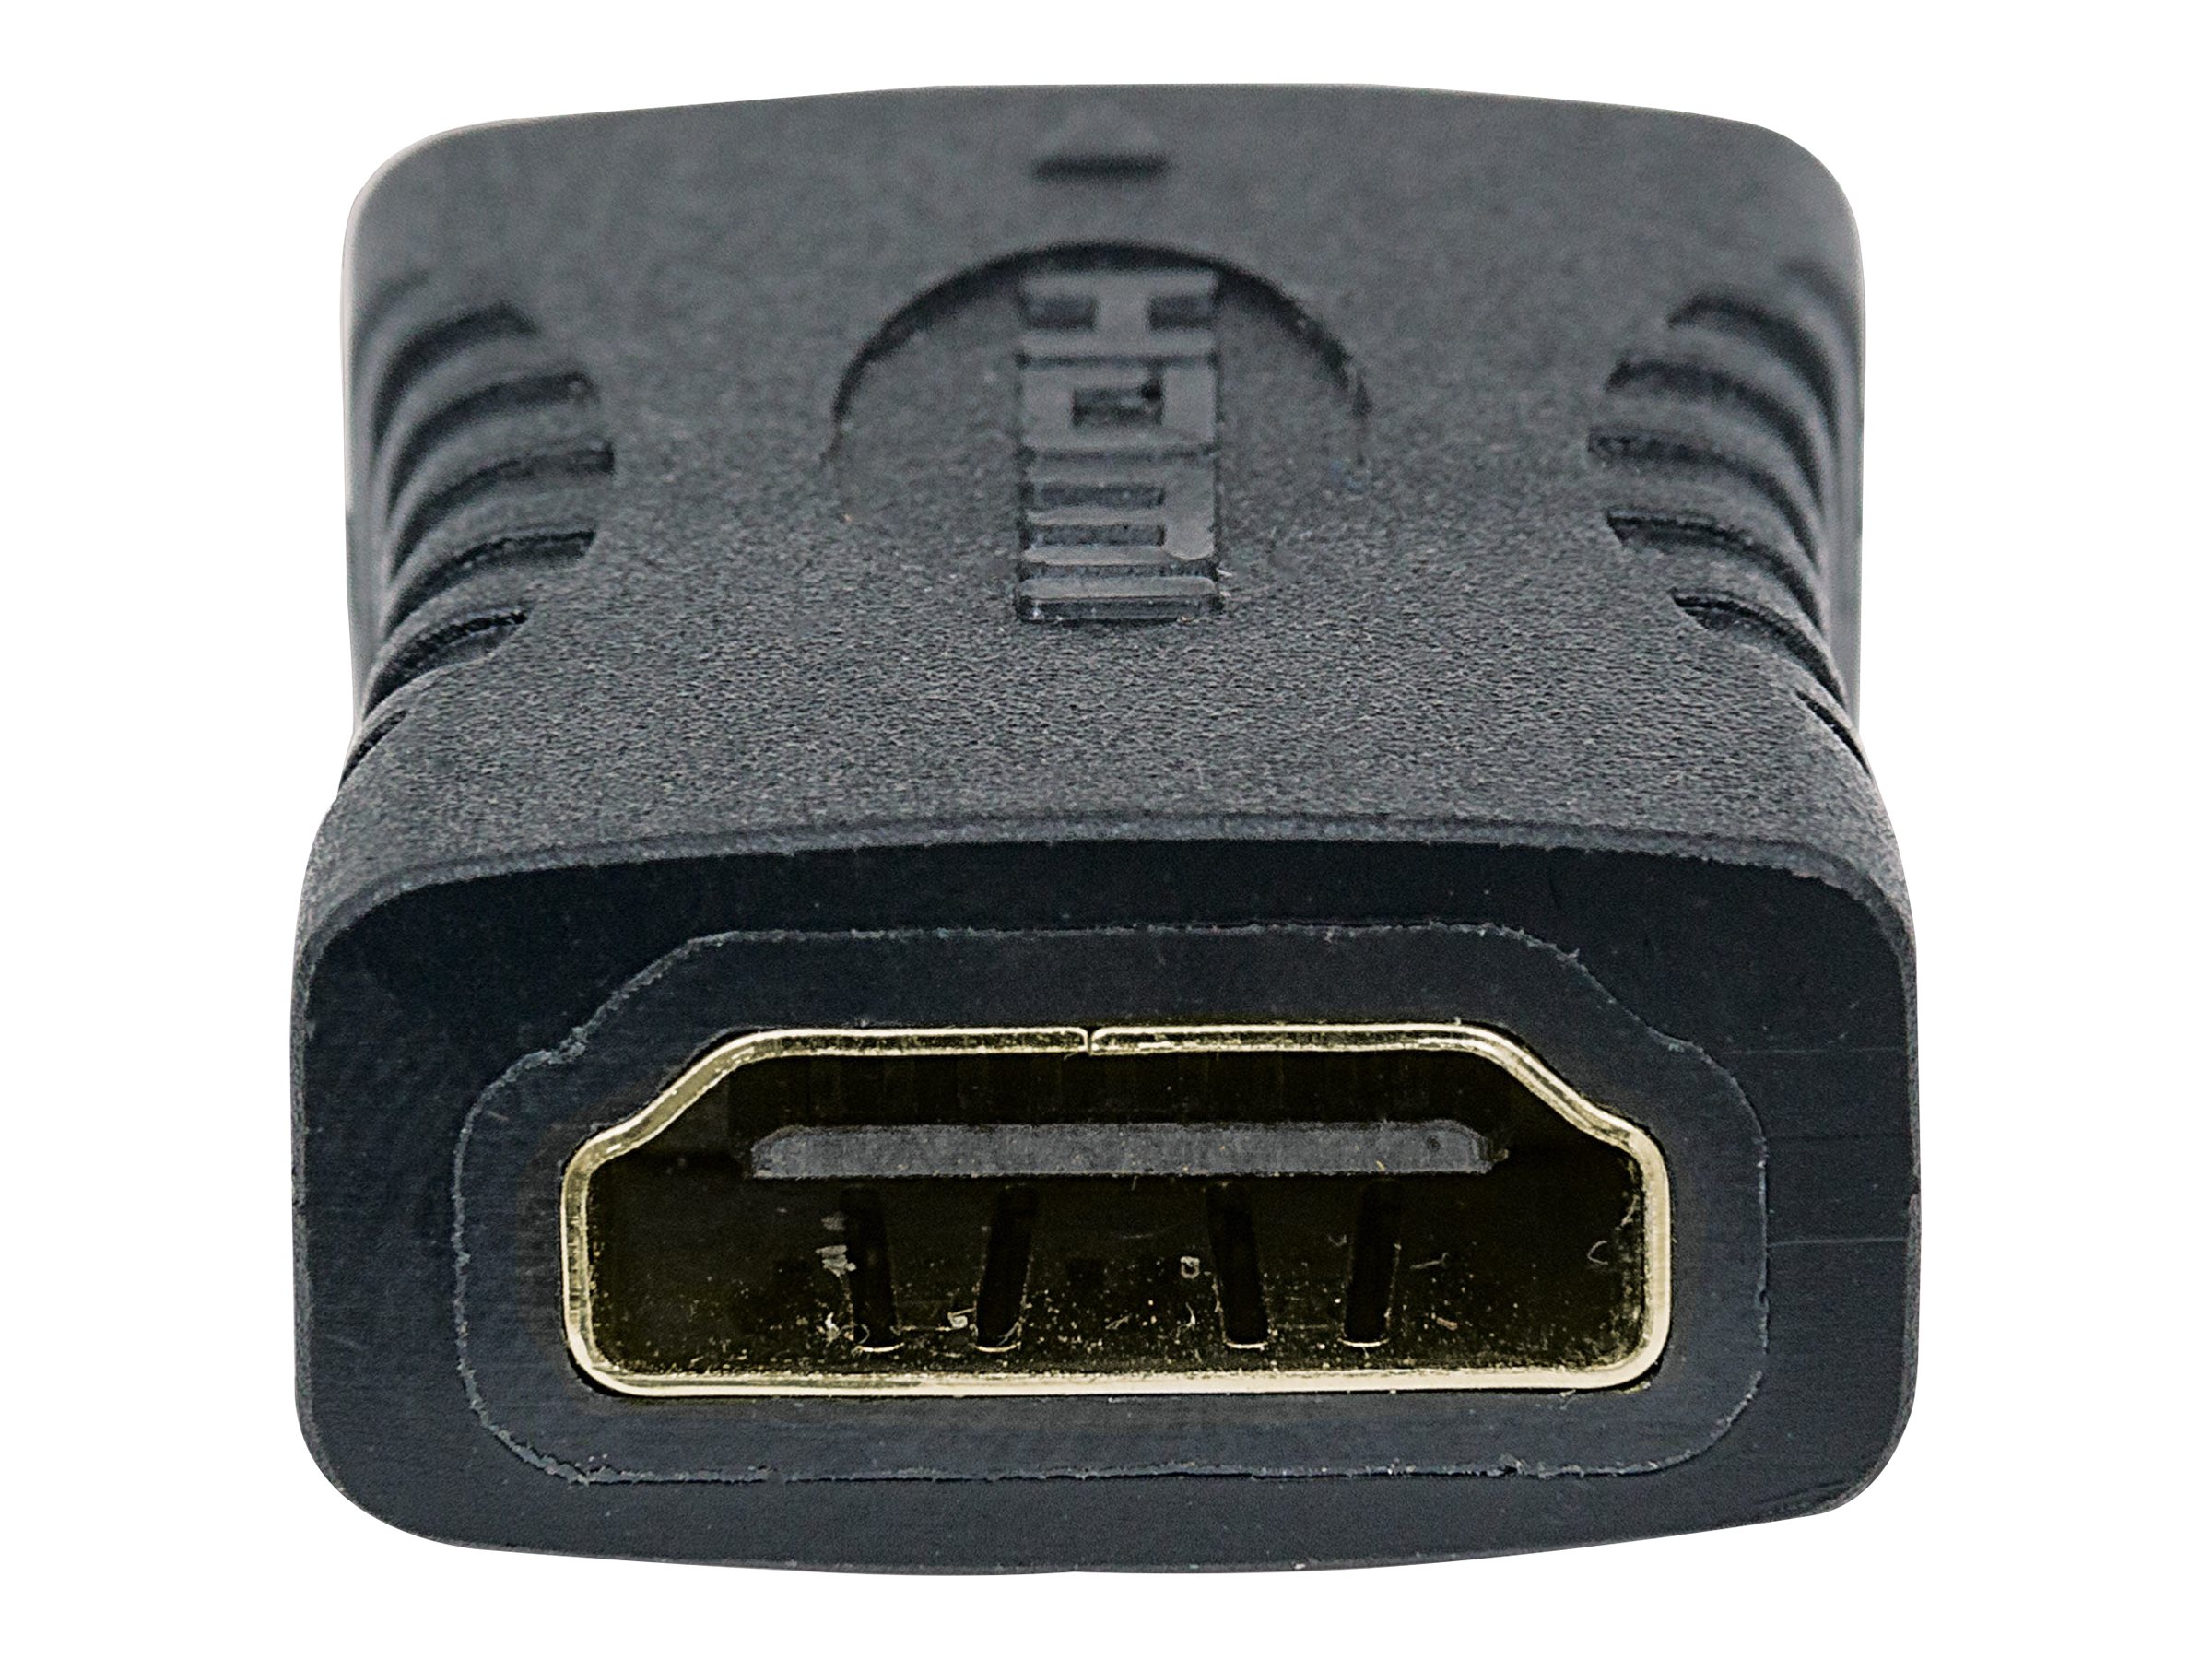 Manhattan HDMI Coupler, 4K@60Hz (Premium High Speed), Female to Female, Straight Connection, Black, Ultra HD 4k x 2k, Fully Shielded, Gold Plated Contacts, Lifetime Warranty, Polybag